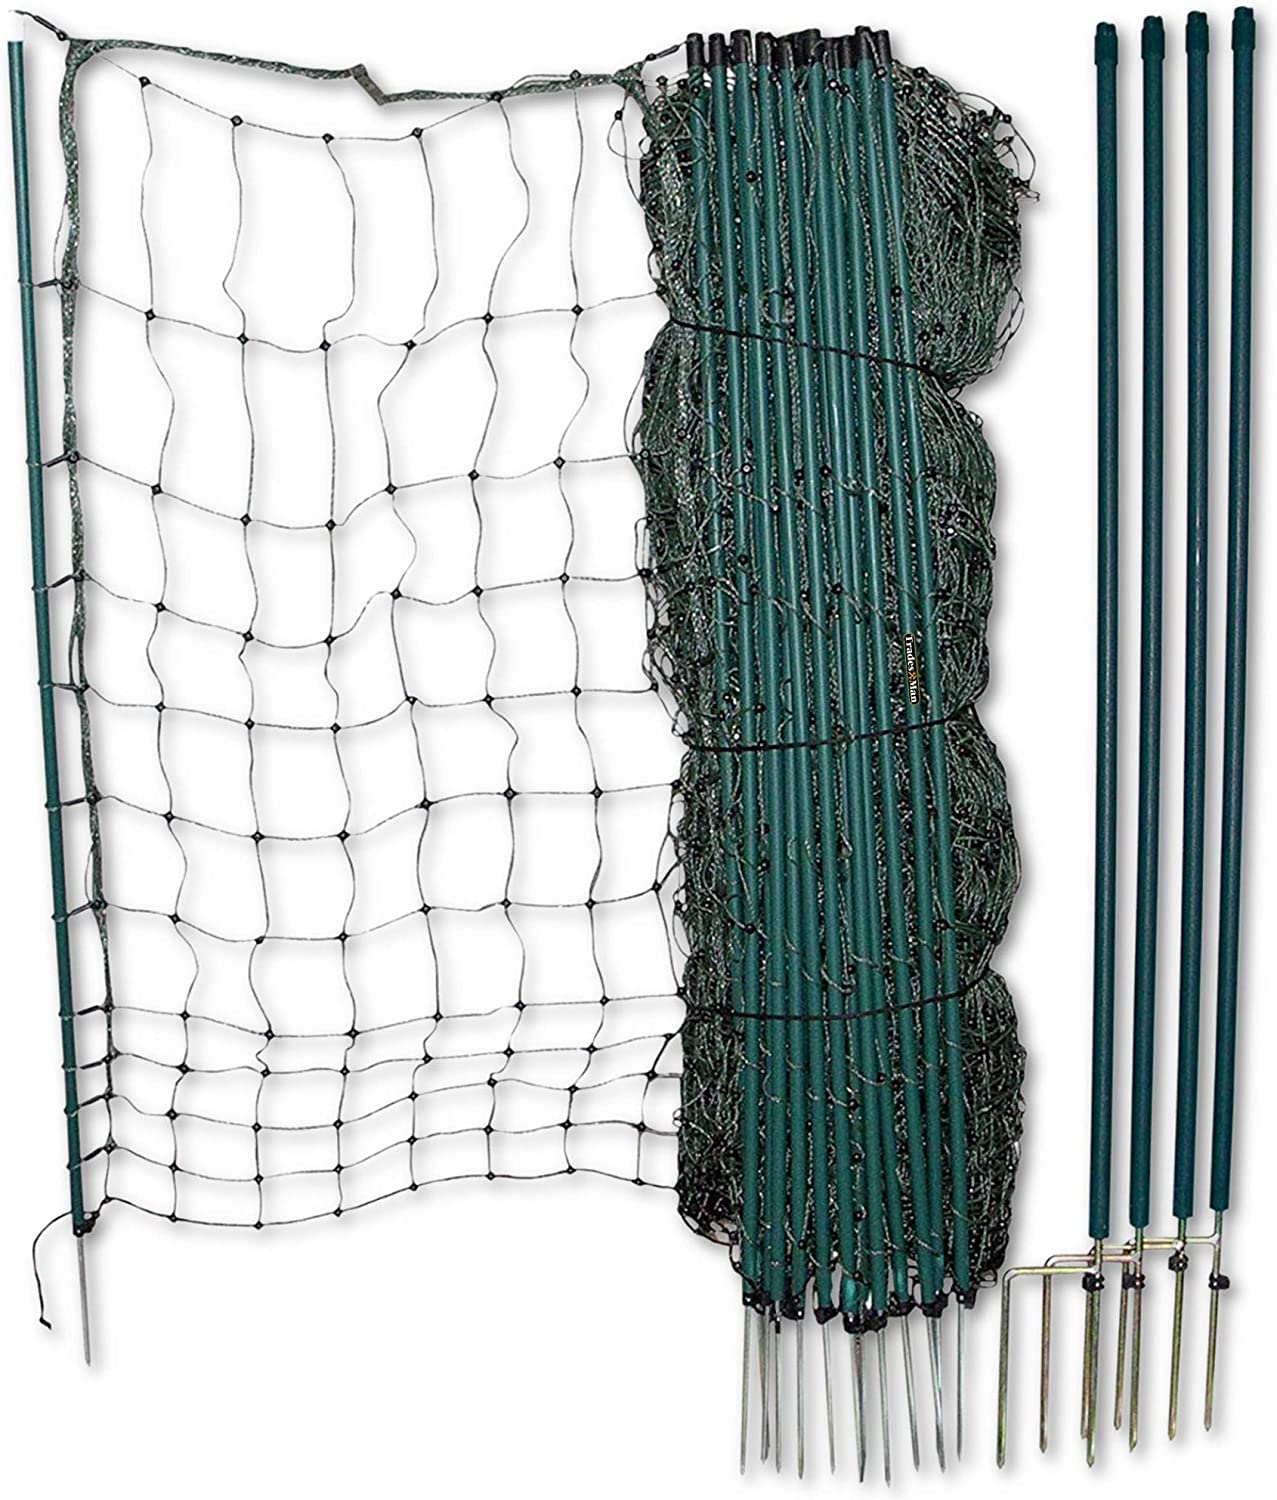 POULTRY NETTING Quality Net Chicken Electric Fence 60m X 115cm - SILBERSHELL